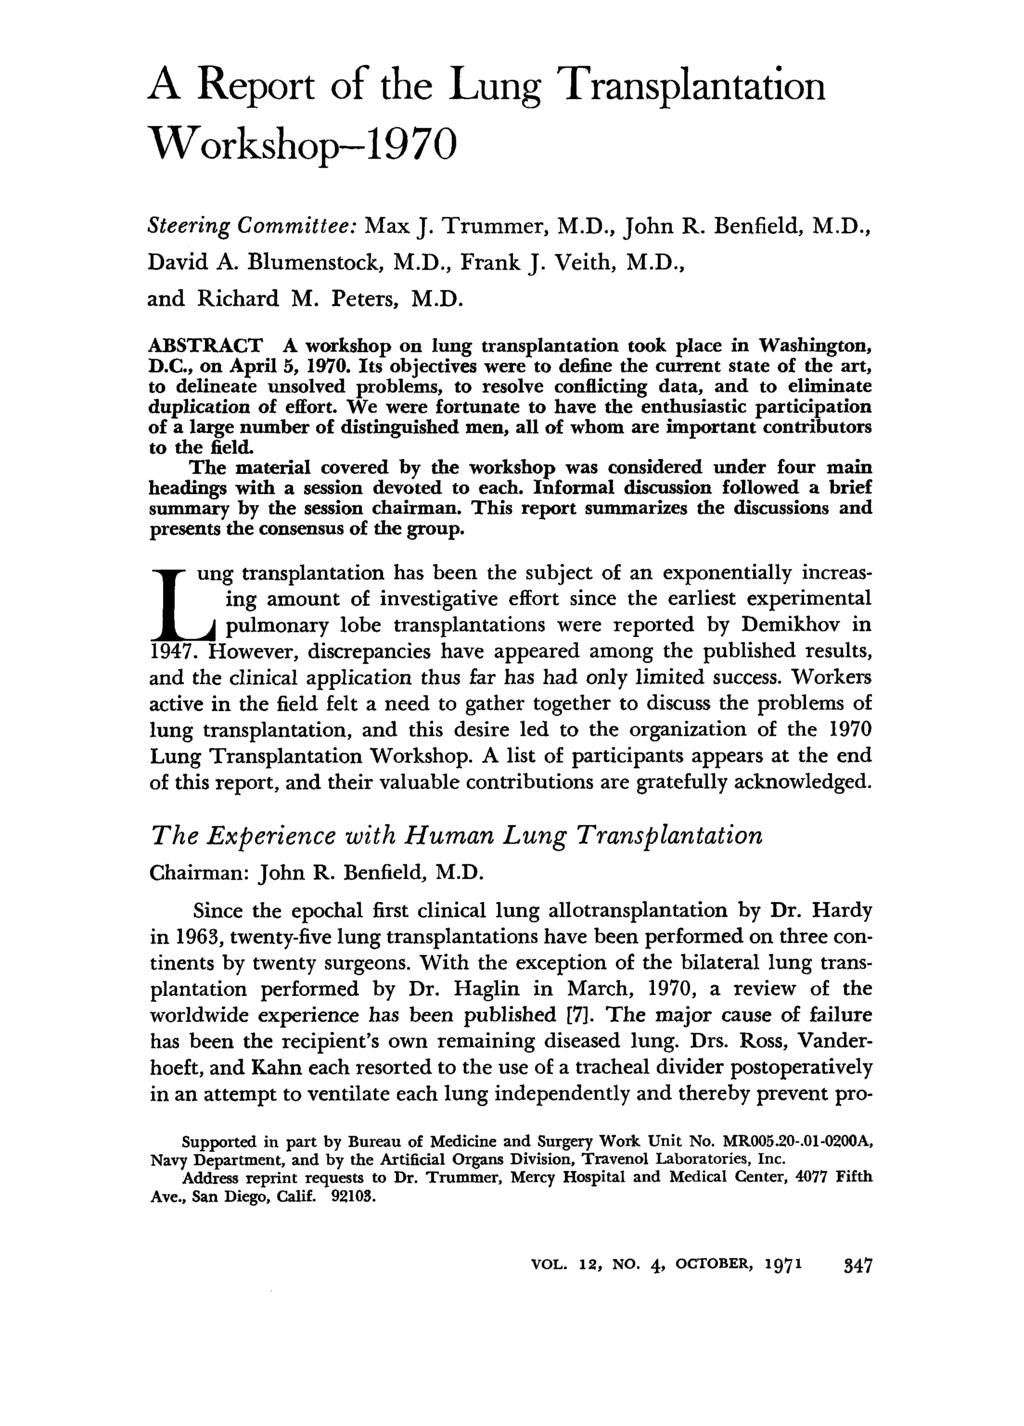 A Report of the Lung Transplantation Workshop-1970 Steering Committee: Max J. Trummer, M.D., John R. Benfield, M.D., David A. Blumenstock, M.D., Frank J. Veith, M.D., and Richard M. Peters, M.D. ABSTRACT A workshop on lung transplantation took place in Washington, D.